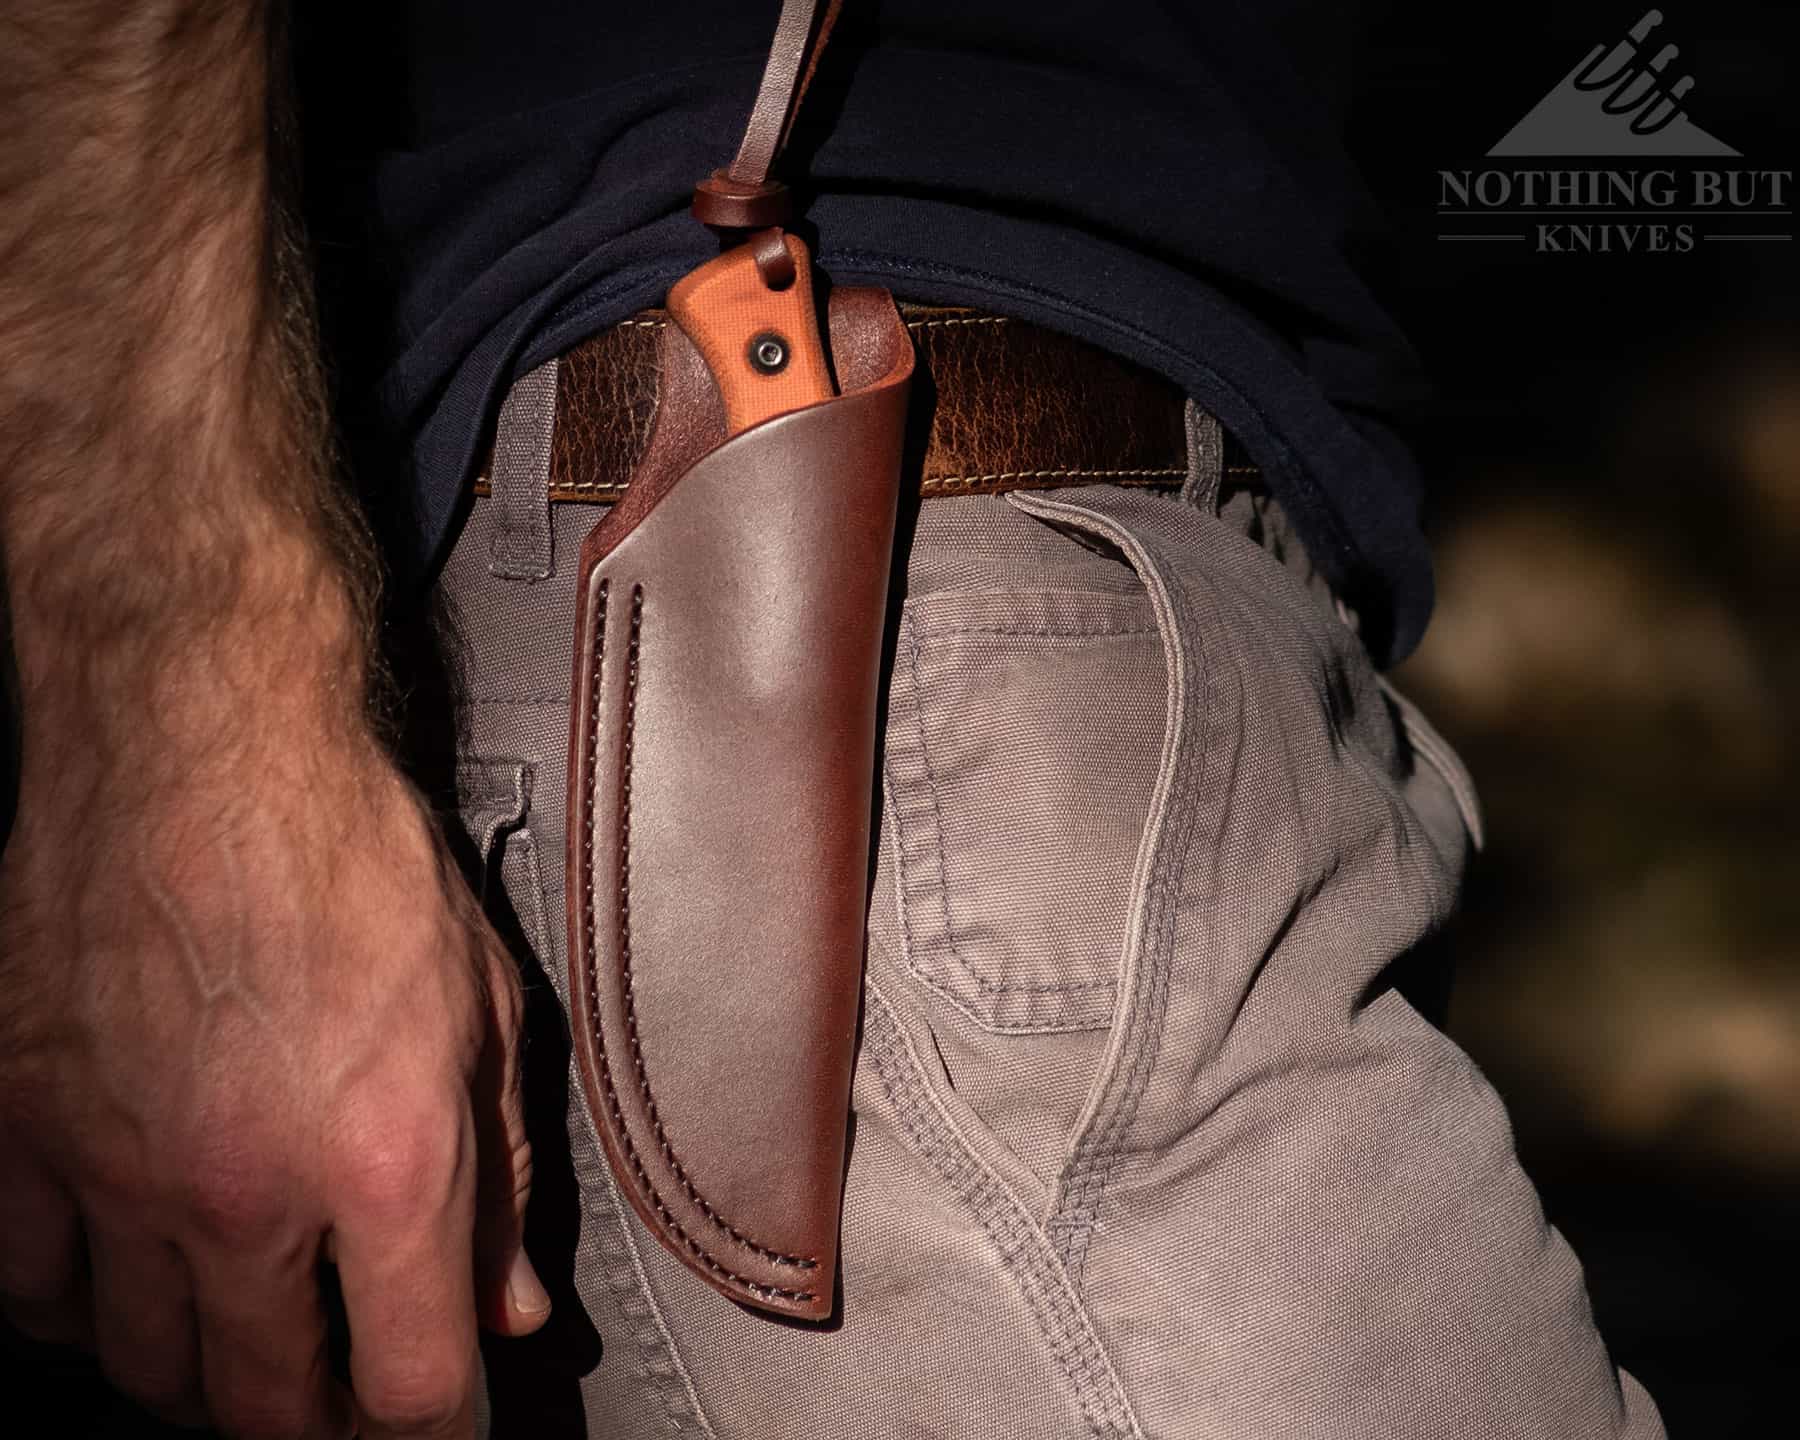 The plain edge version of the Bugsy ships with a brown, leather sheath like the one pictured here. 